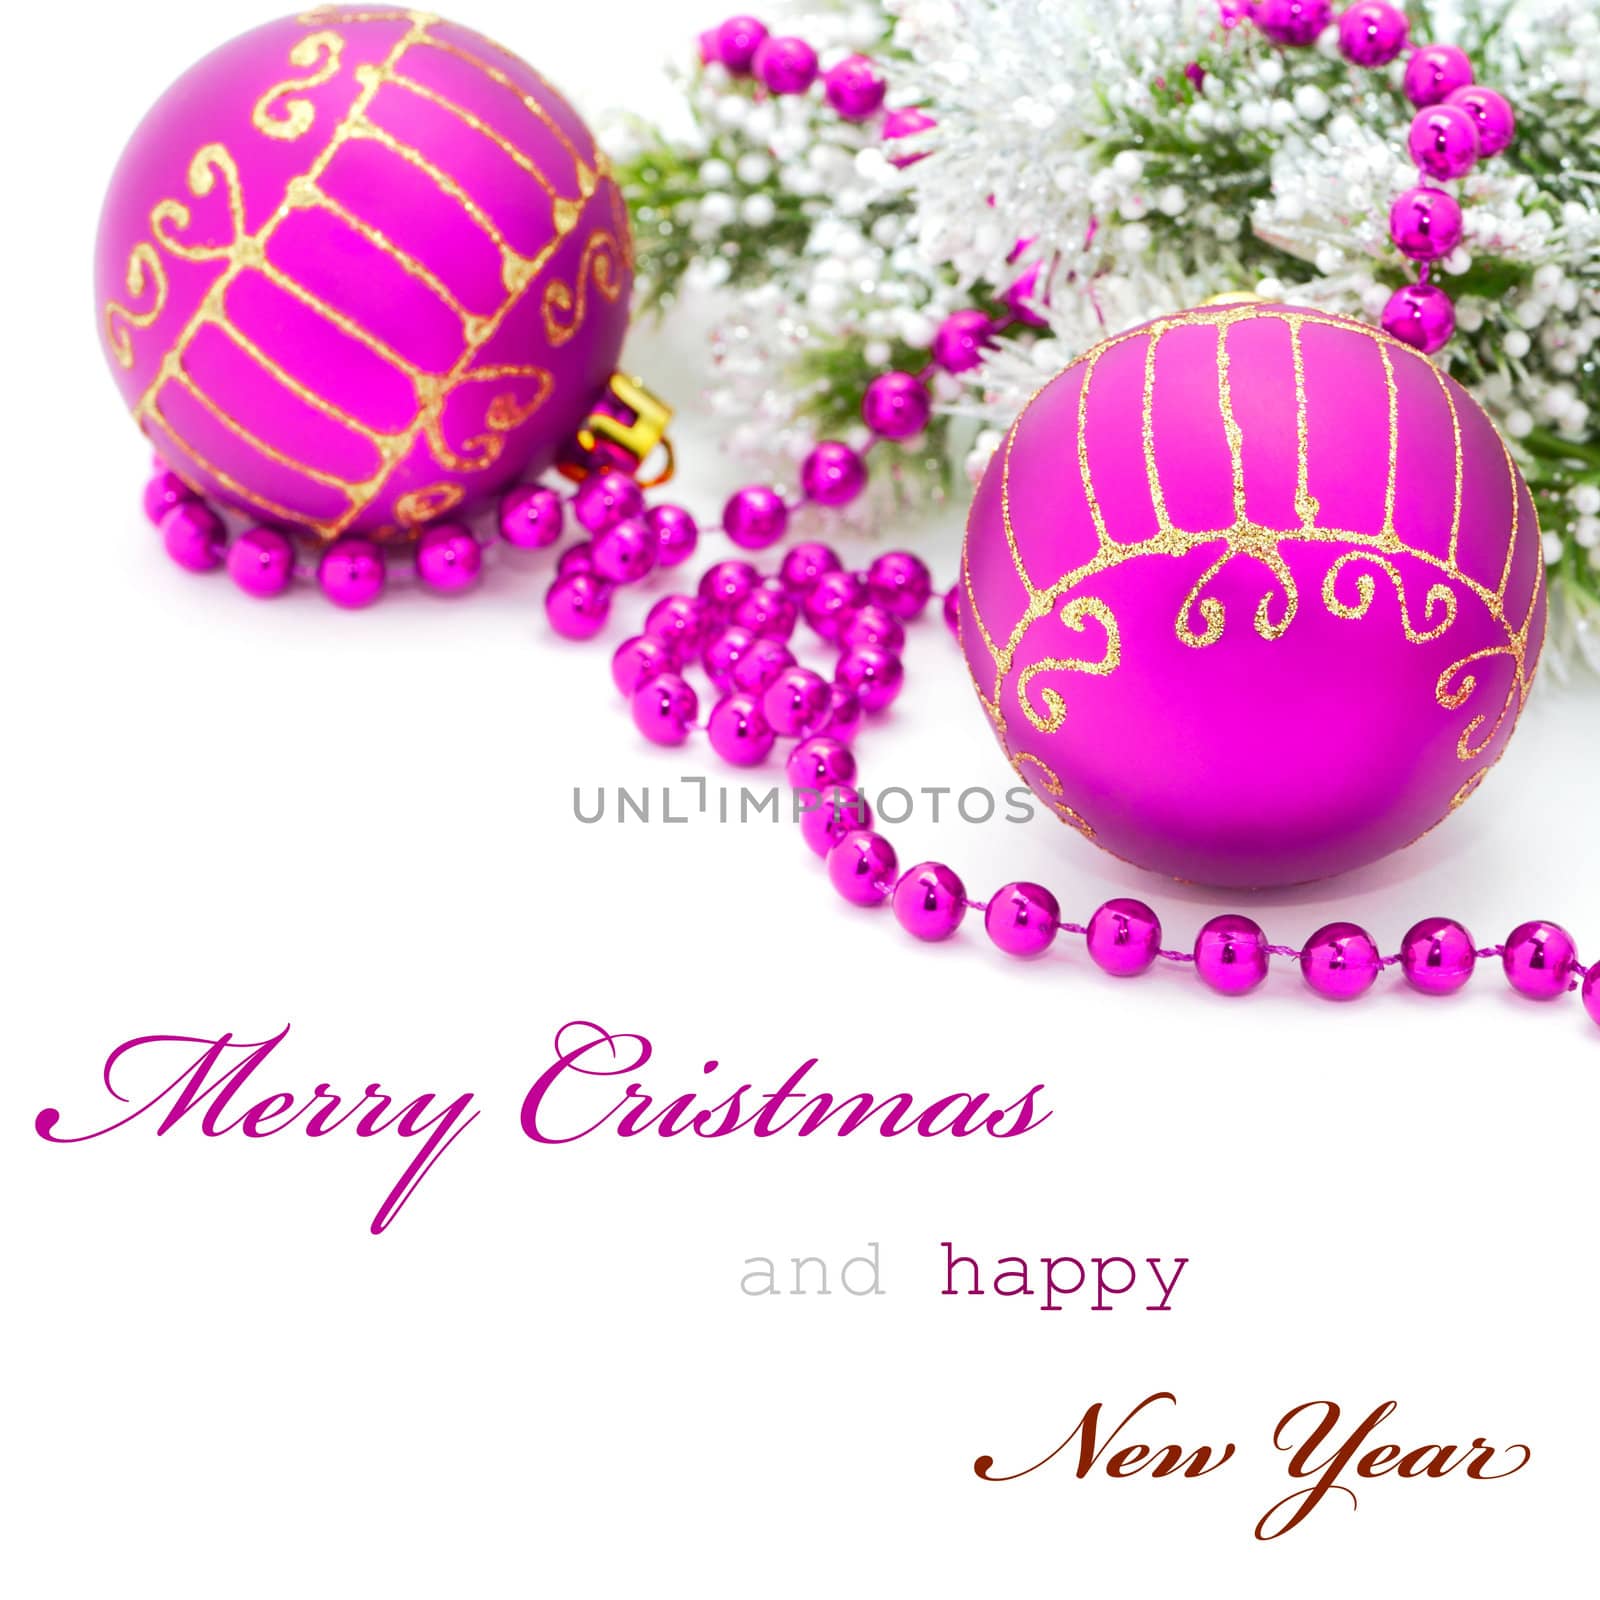 Christmas greeting card with simple text